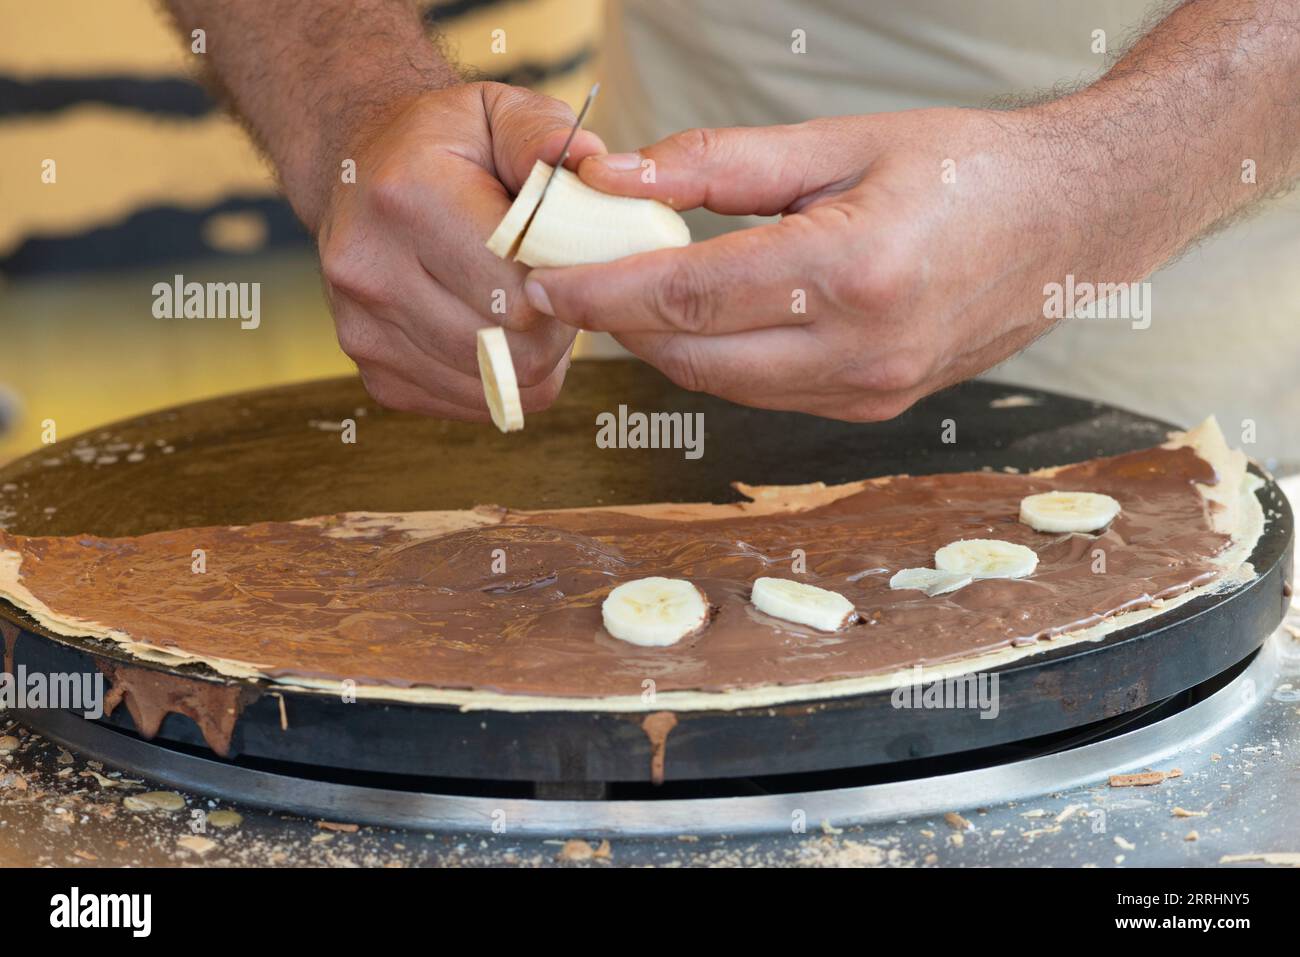 Italy, Lombardy, Food Festival, Making Crepes Stock Photo